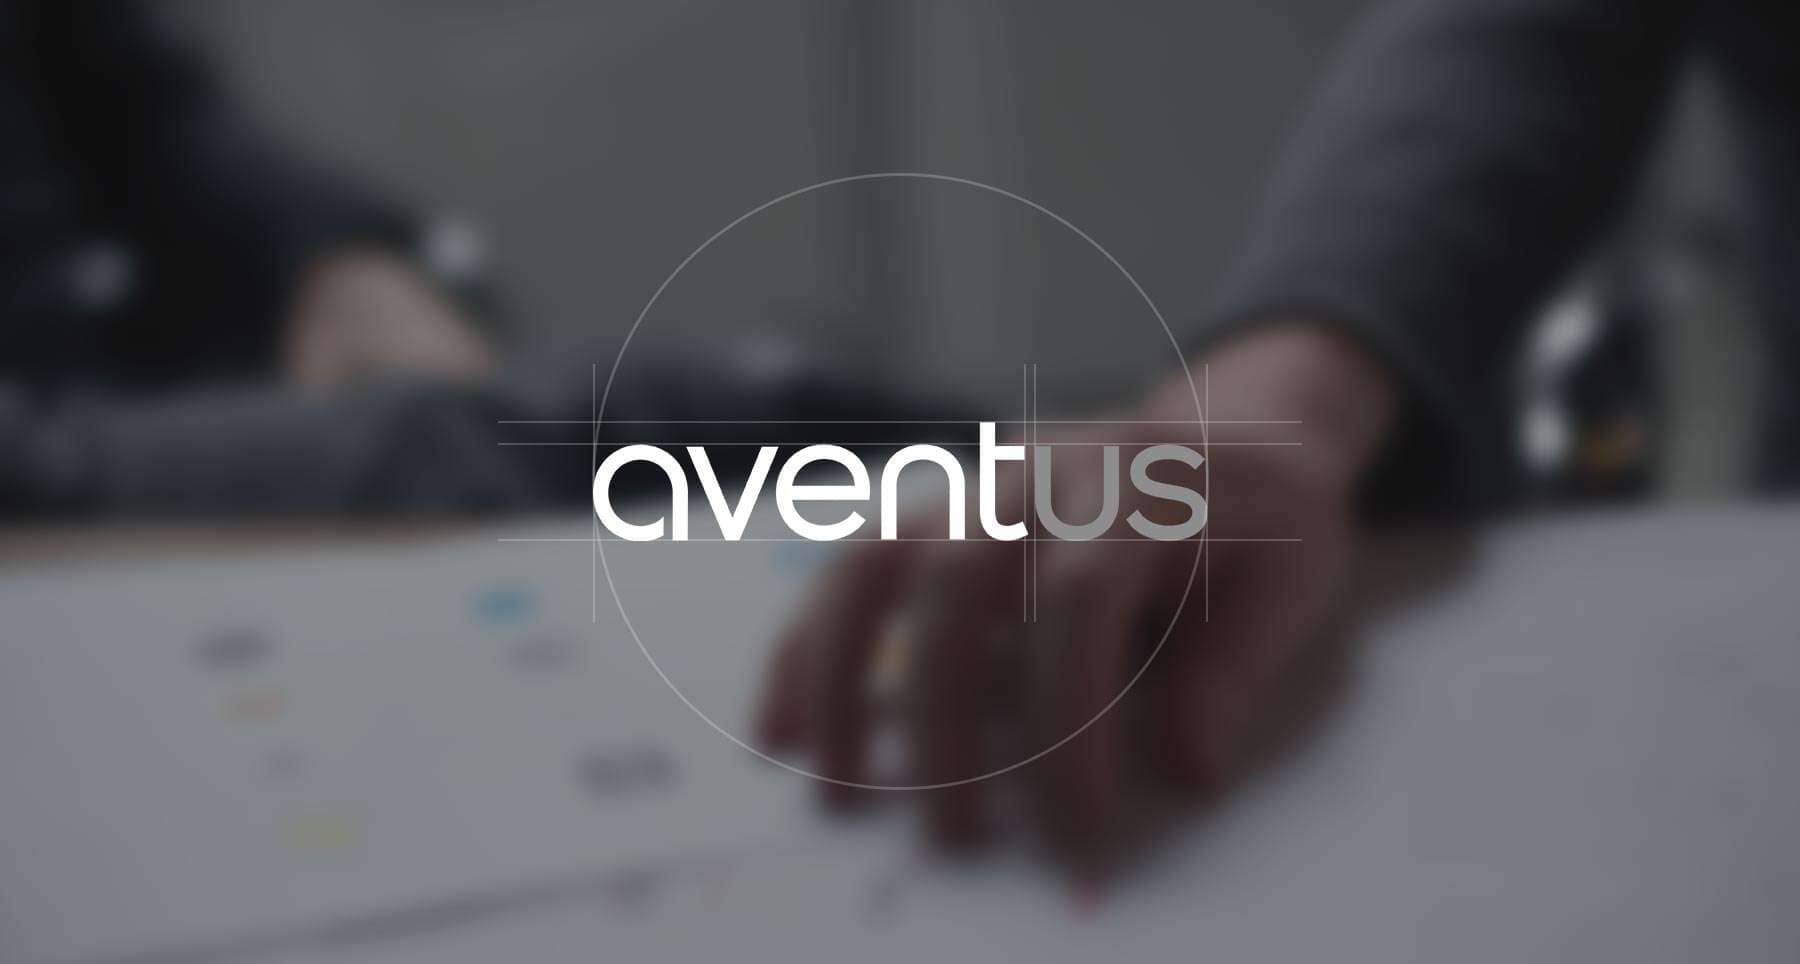 Aventus rebrands with new website, logos and locations